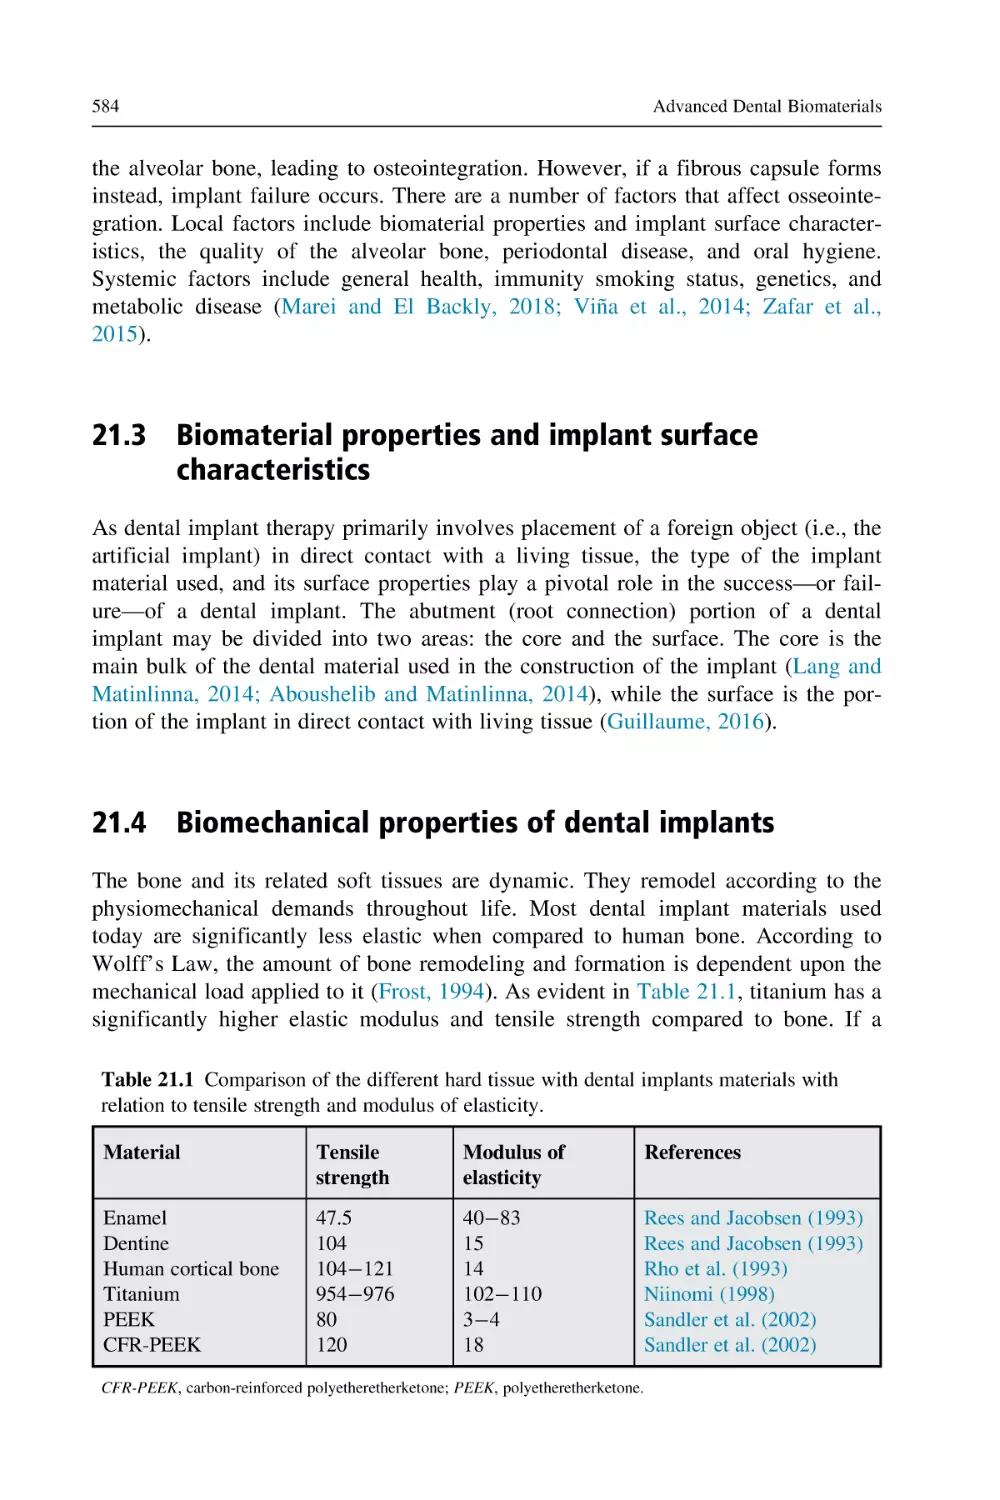 21.3 Biomaterial properties and implant surface characteristics
21.4 Biomechanical properties of dental implants